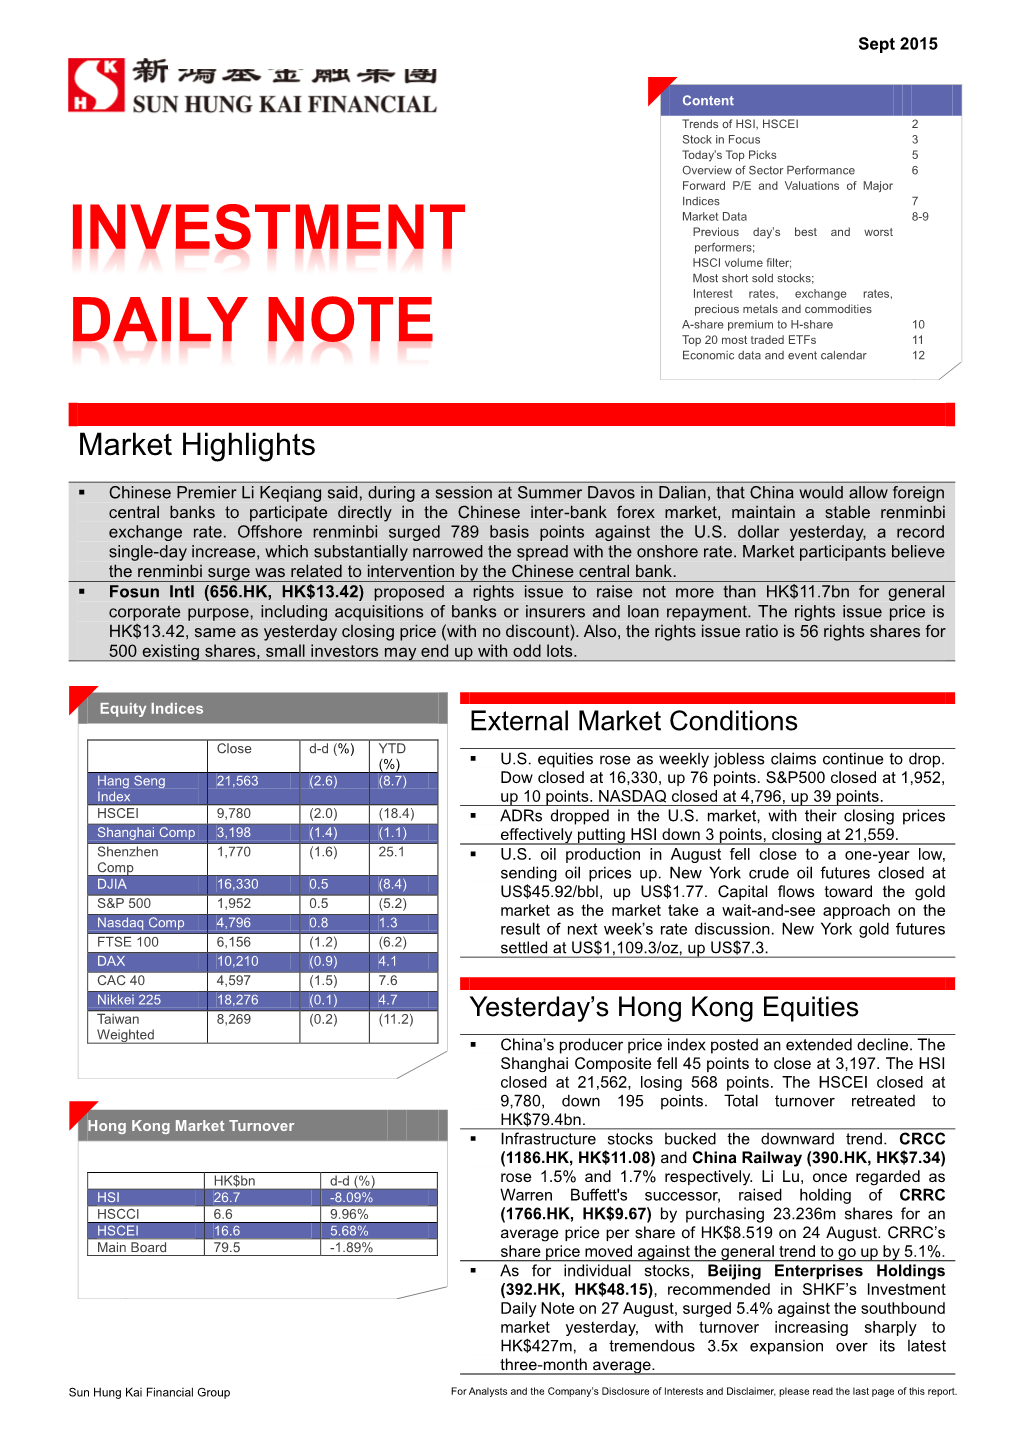 INVESTMENT DAILY NOTE 11 Sept 2015